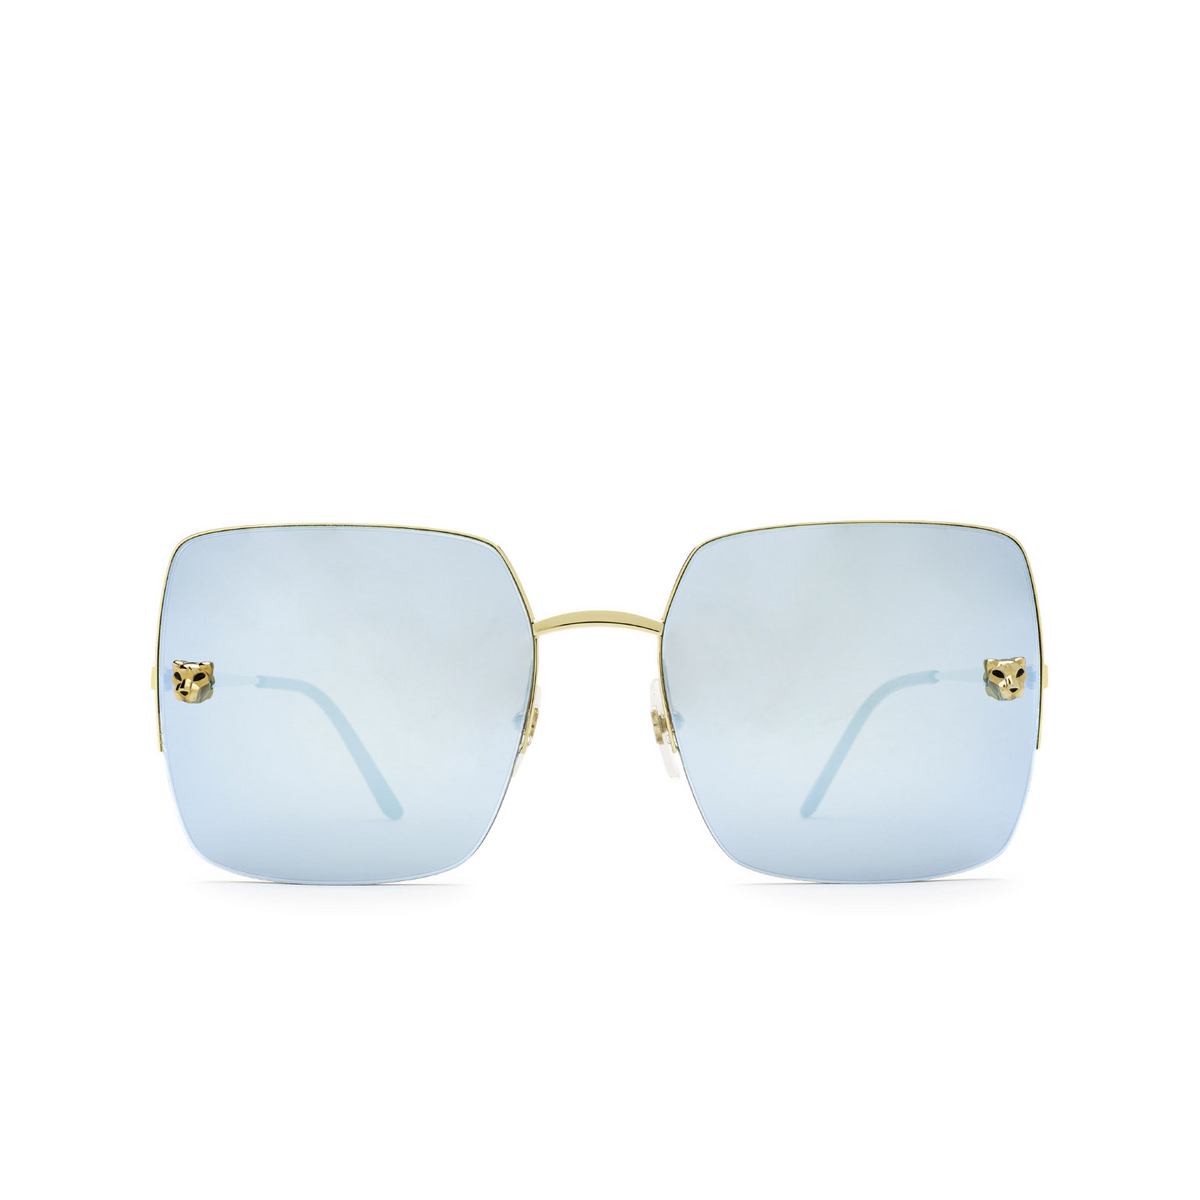 Cartier® Square Sunglasses: CT0121S color Gold 002 - front view.